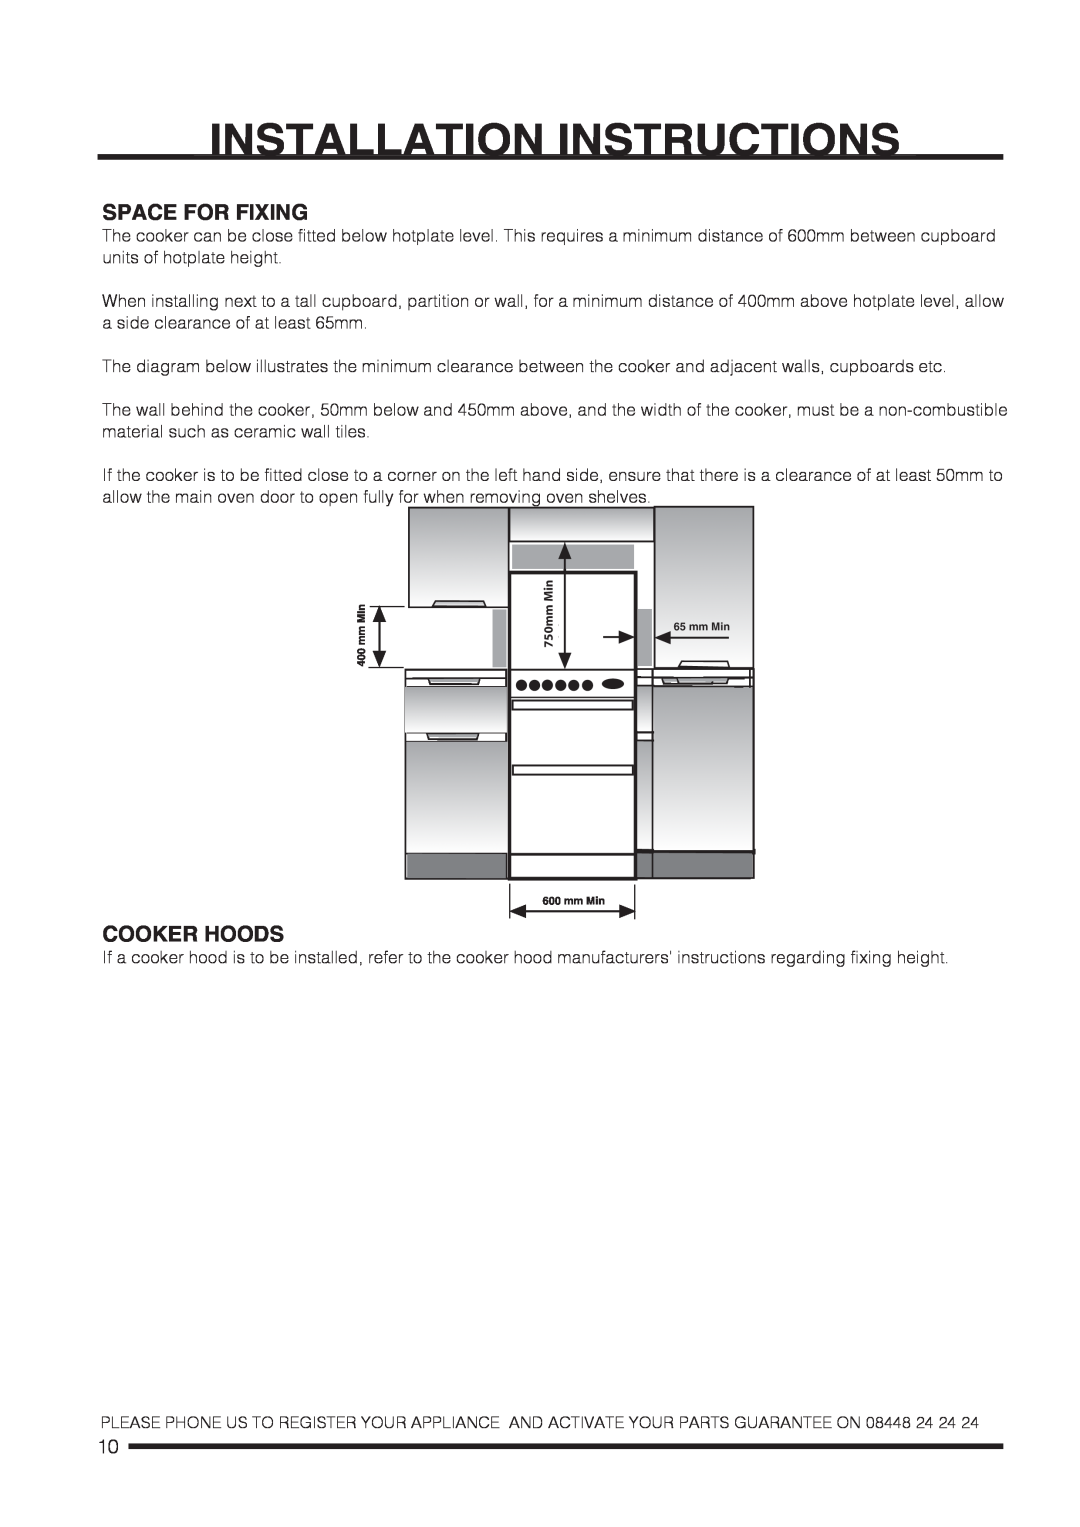 Hotpoint CH60DPXF S, CH60DPCF S, CH60DTCF S, CH60DTXFS Installation Instructions, Space For Fixing, Cooker Hoods 